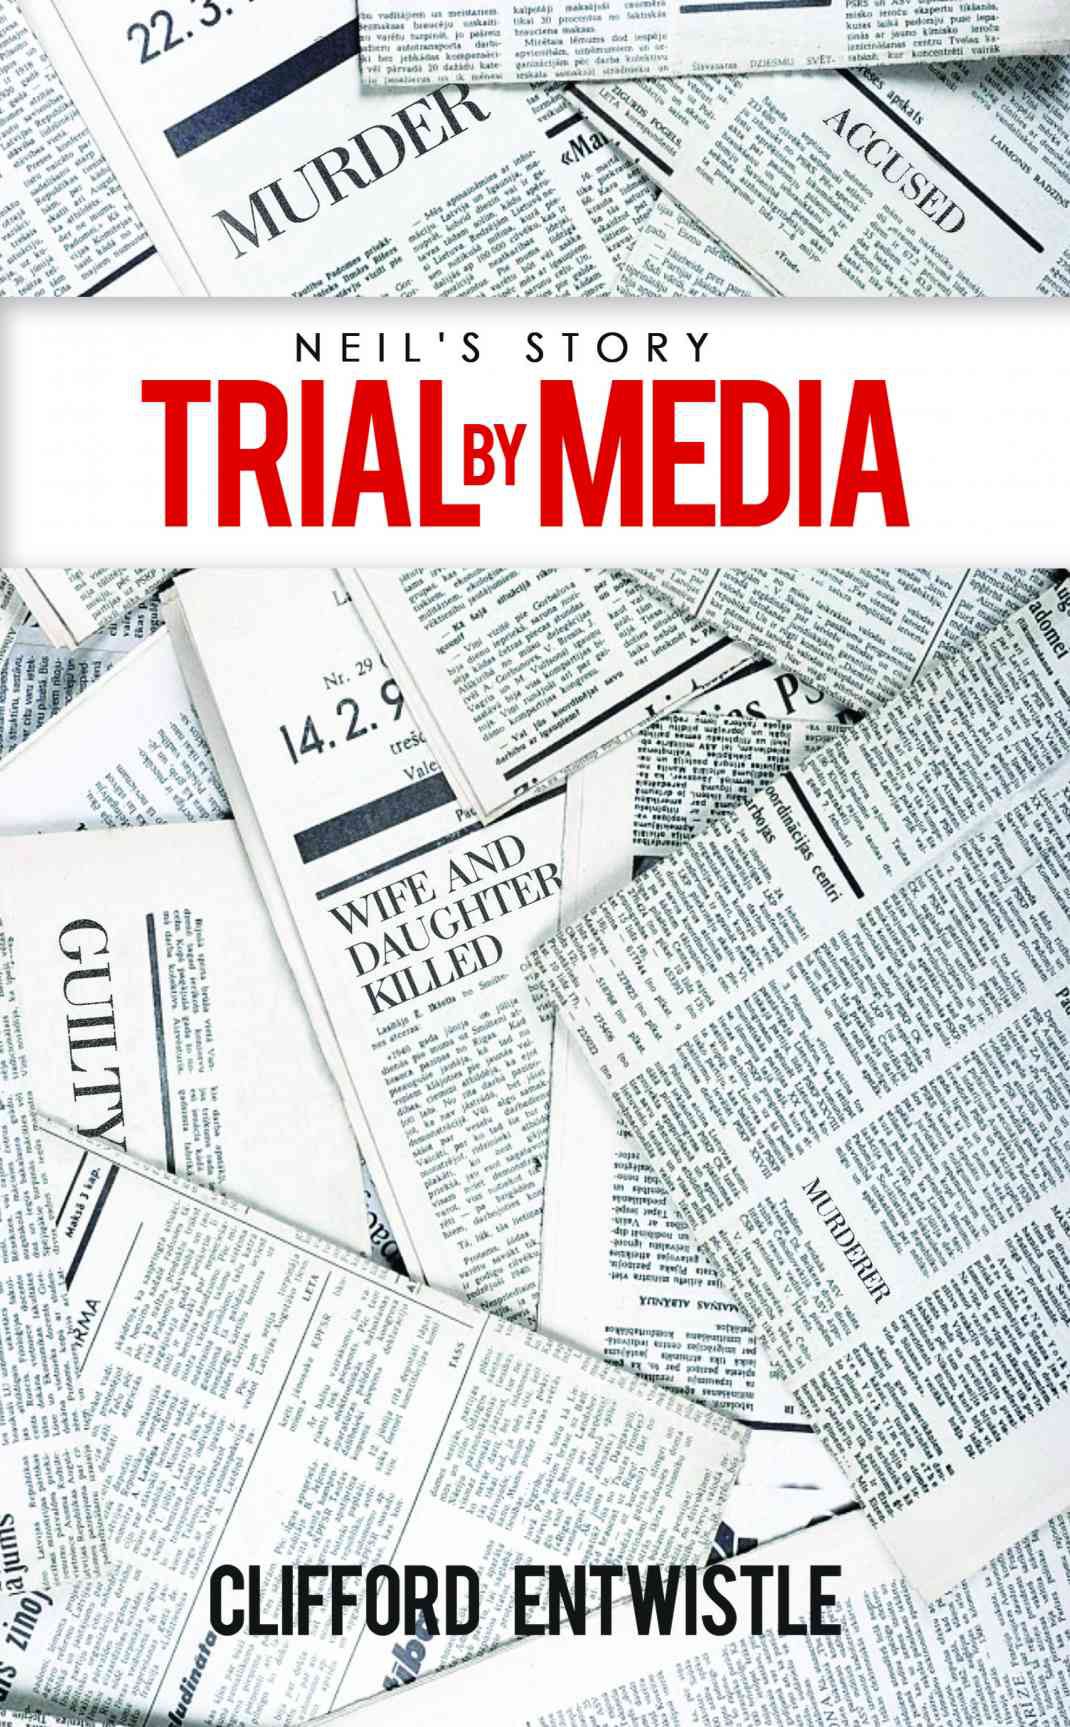 ‘Neil's Story: Trial By Media’ by Clifford Entwistle Featured In Newspaper